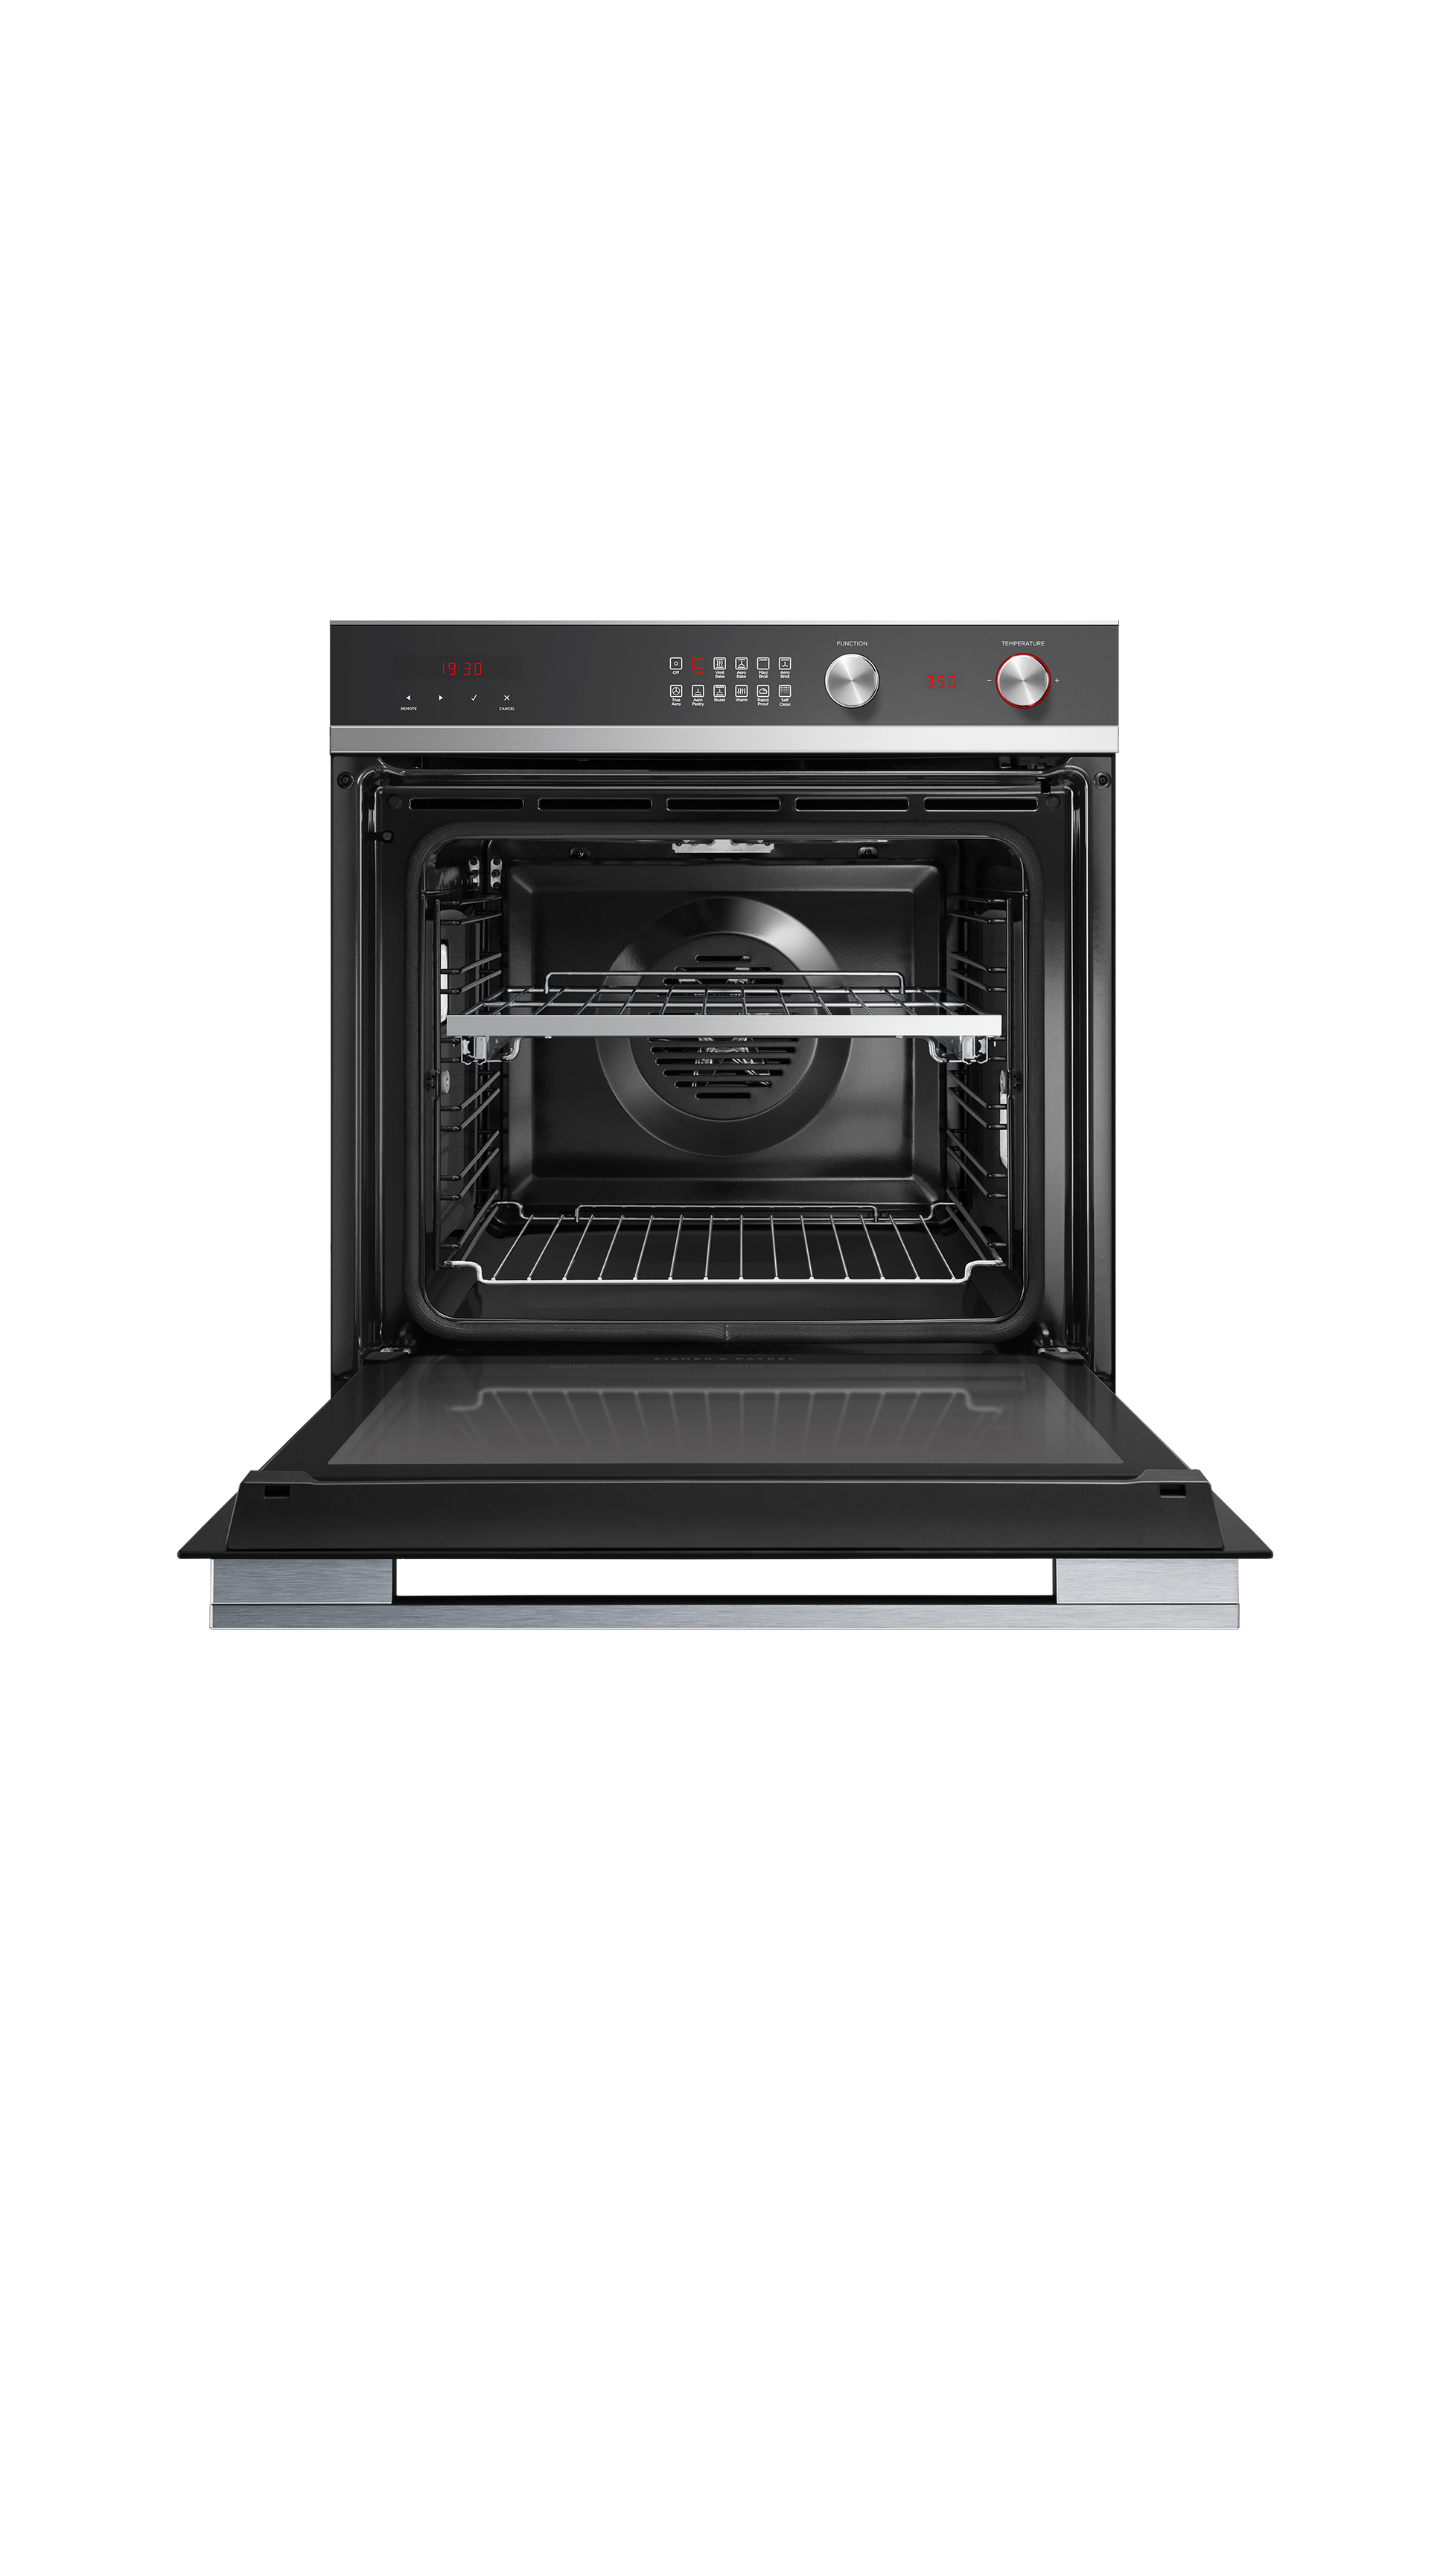 Oven, 24”, 11 Function, Self-cleaning, 84-mug-open